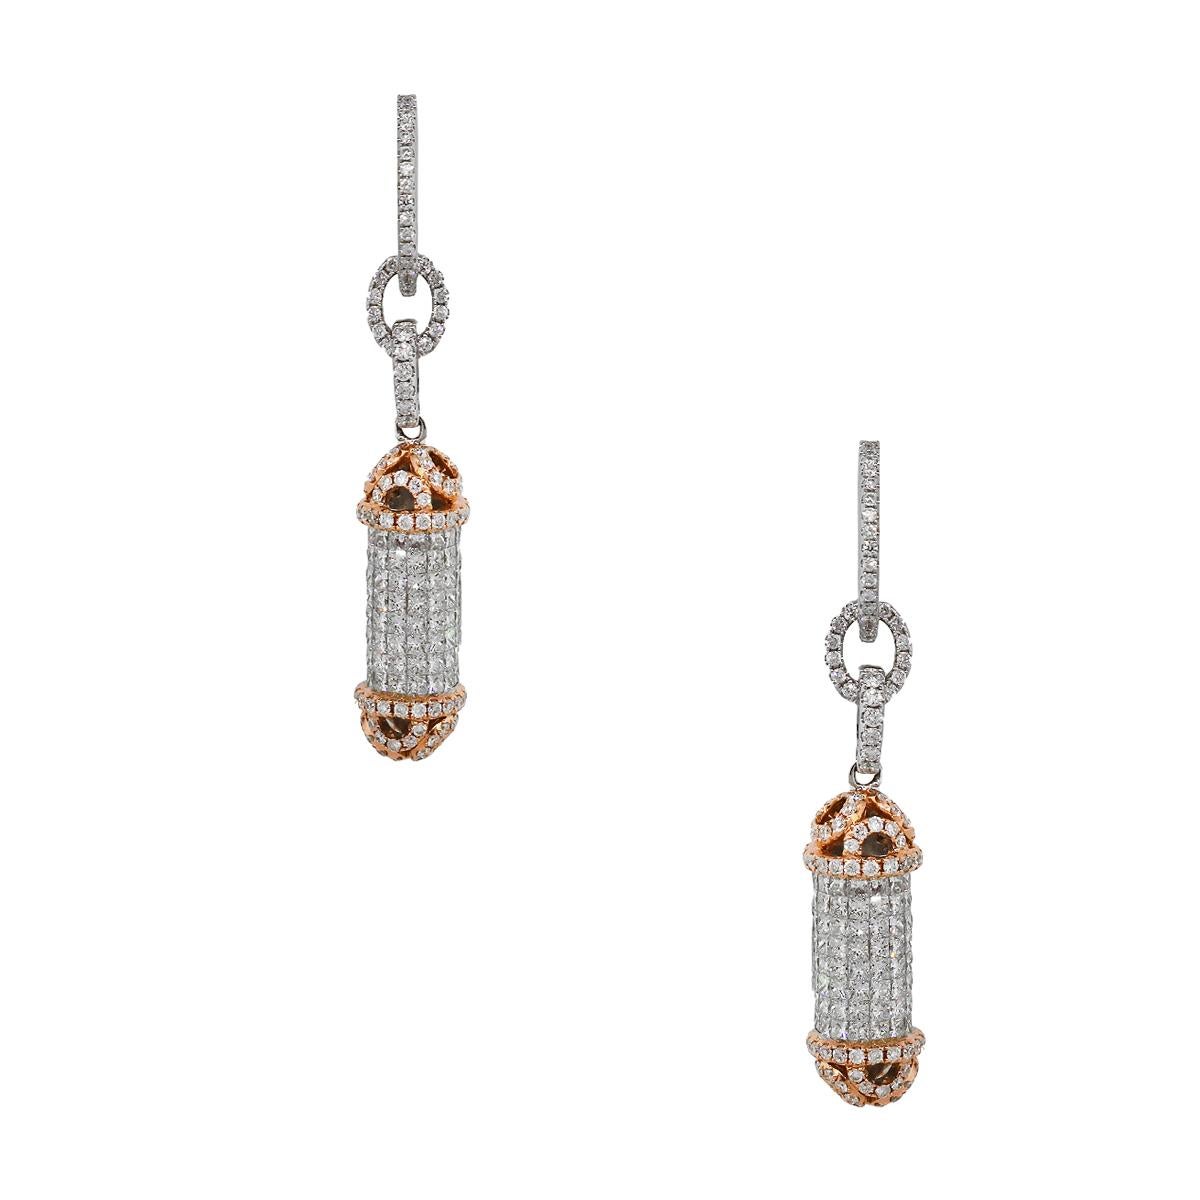 Material: 18k White Gold and 18k Rose Gold
Diamond Details: Approximately 17ctw of round brilliant diamonds. Diamonds are G/H in color and VS in clarity.
Earrings Measurements: 2″ x 0.56″ x 0.35″  13.5g (8.7dwt)
Pendant Measurements: 2″ x 0.15″ 